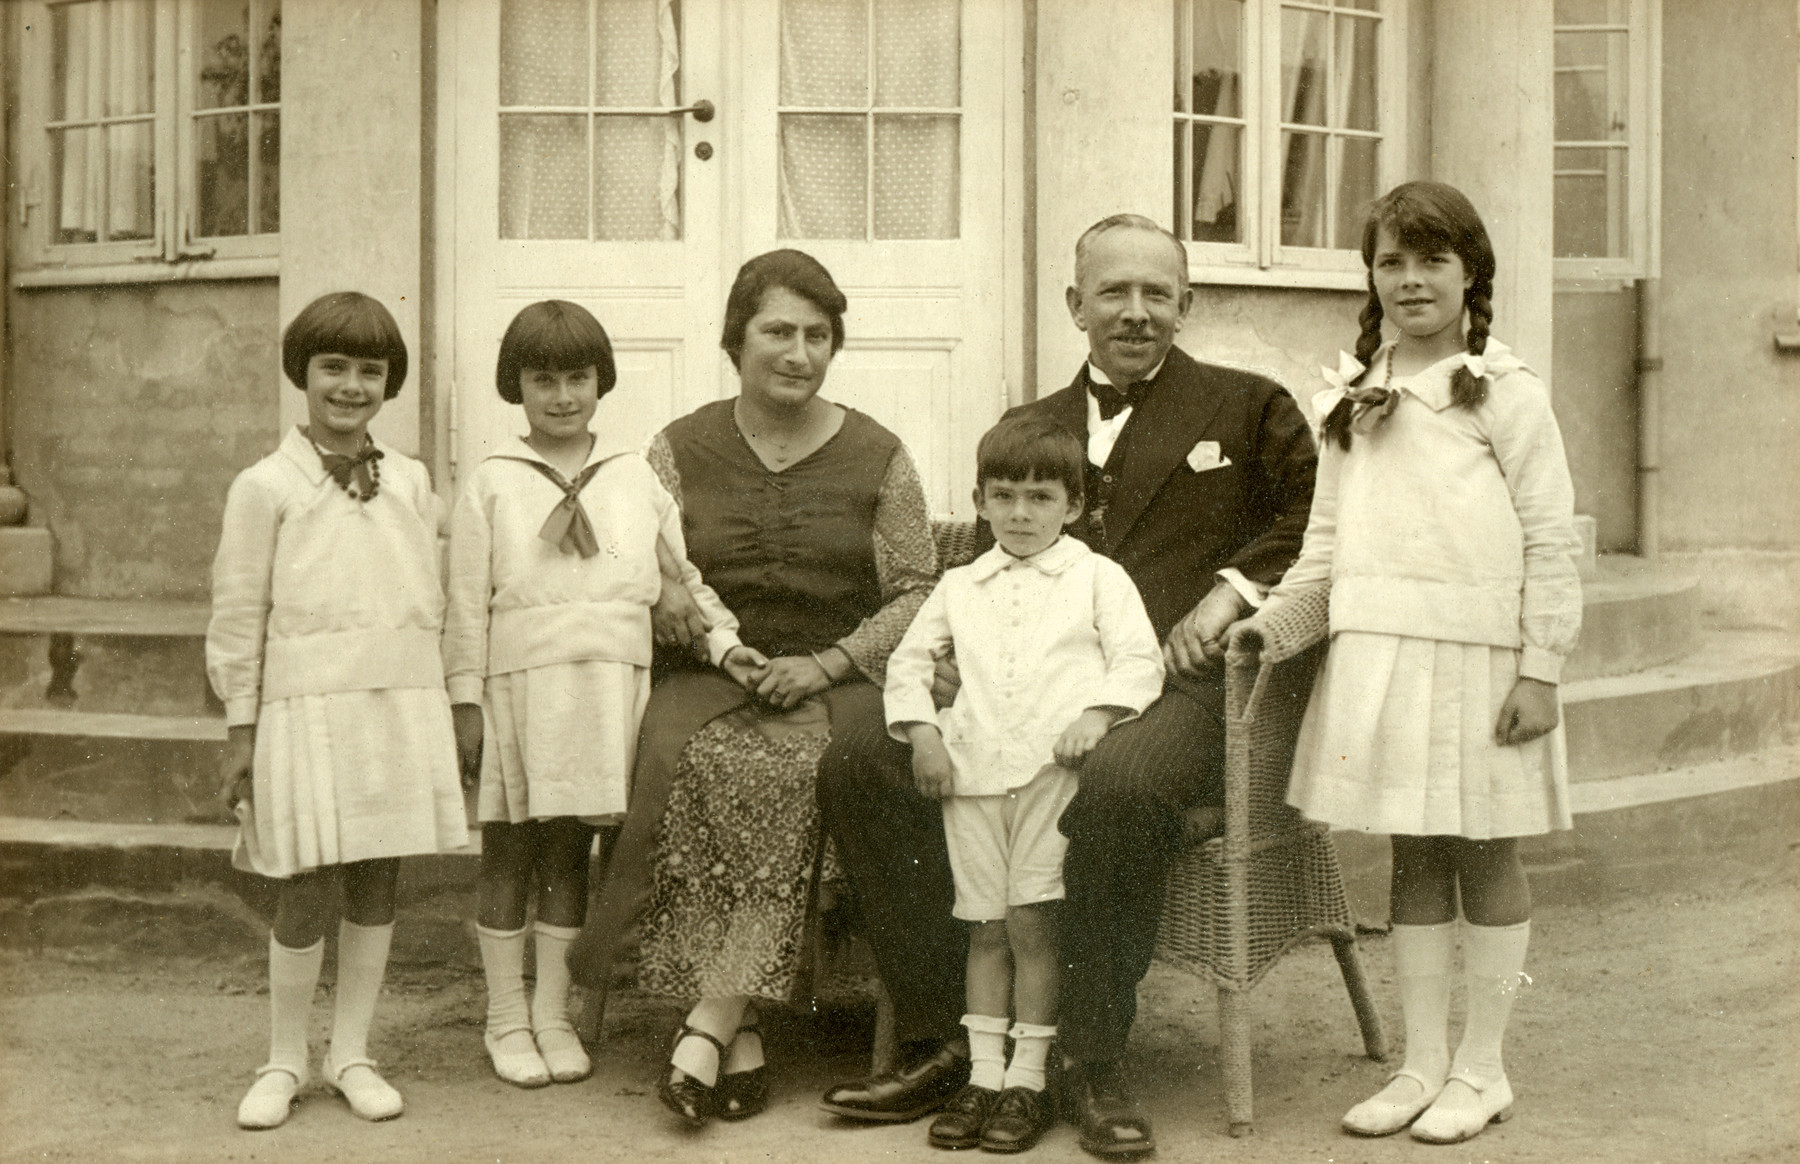 The Oestermann family celebrates Moritz Oestermann's fiftieth birthday in a mansion they rented for the occasion.

Pictured are Margot, Lillian, Gertrud, Richard, Moritz and Else Oestermann.